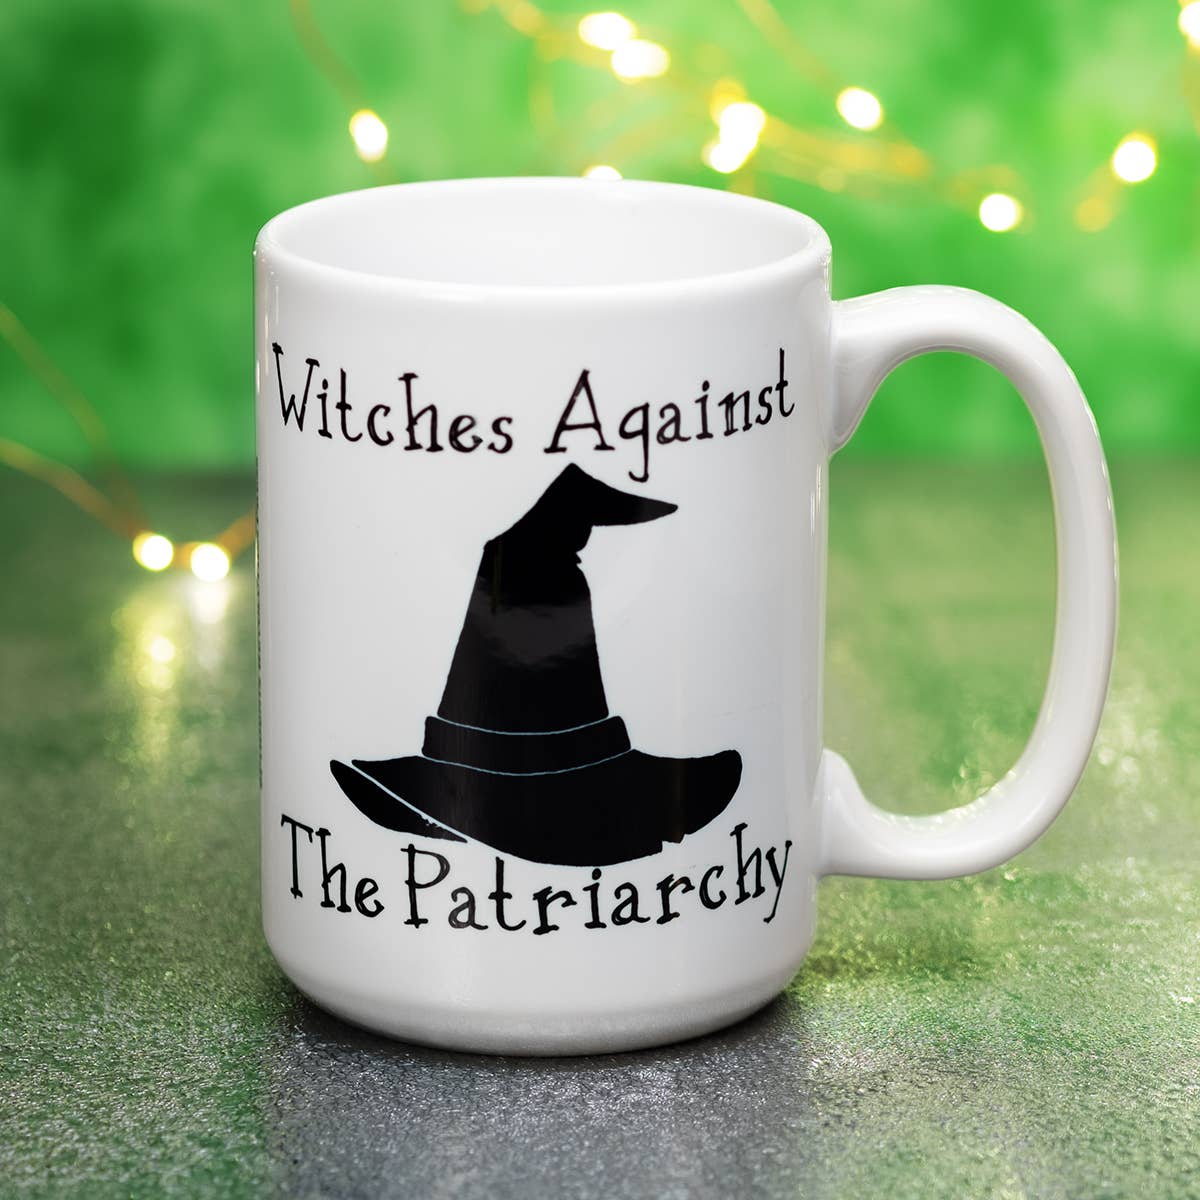 Witches Against The Patriarchy 15 Ounce Mug